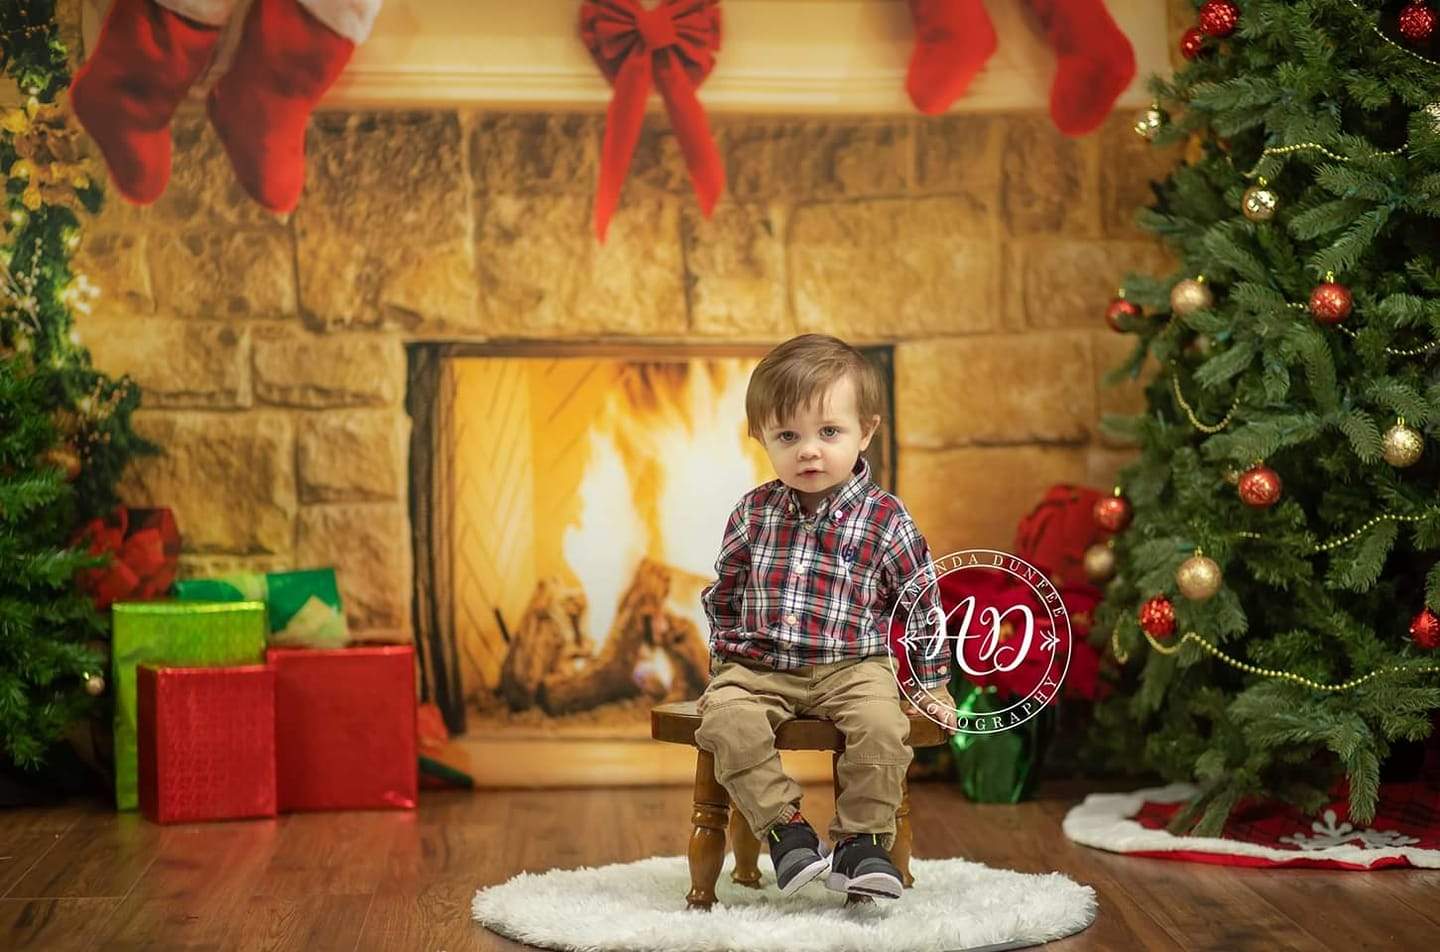 Kate Christmas Red Socks with Fireplace Backdrop for Photography